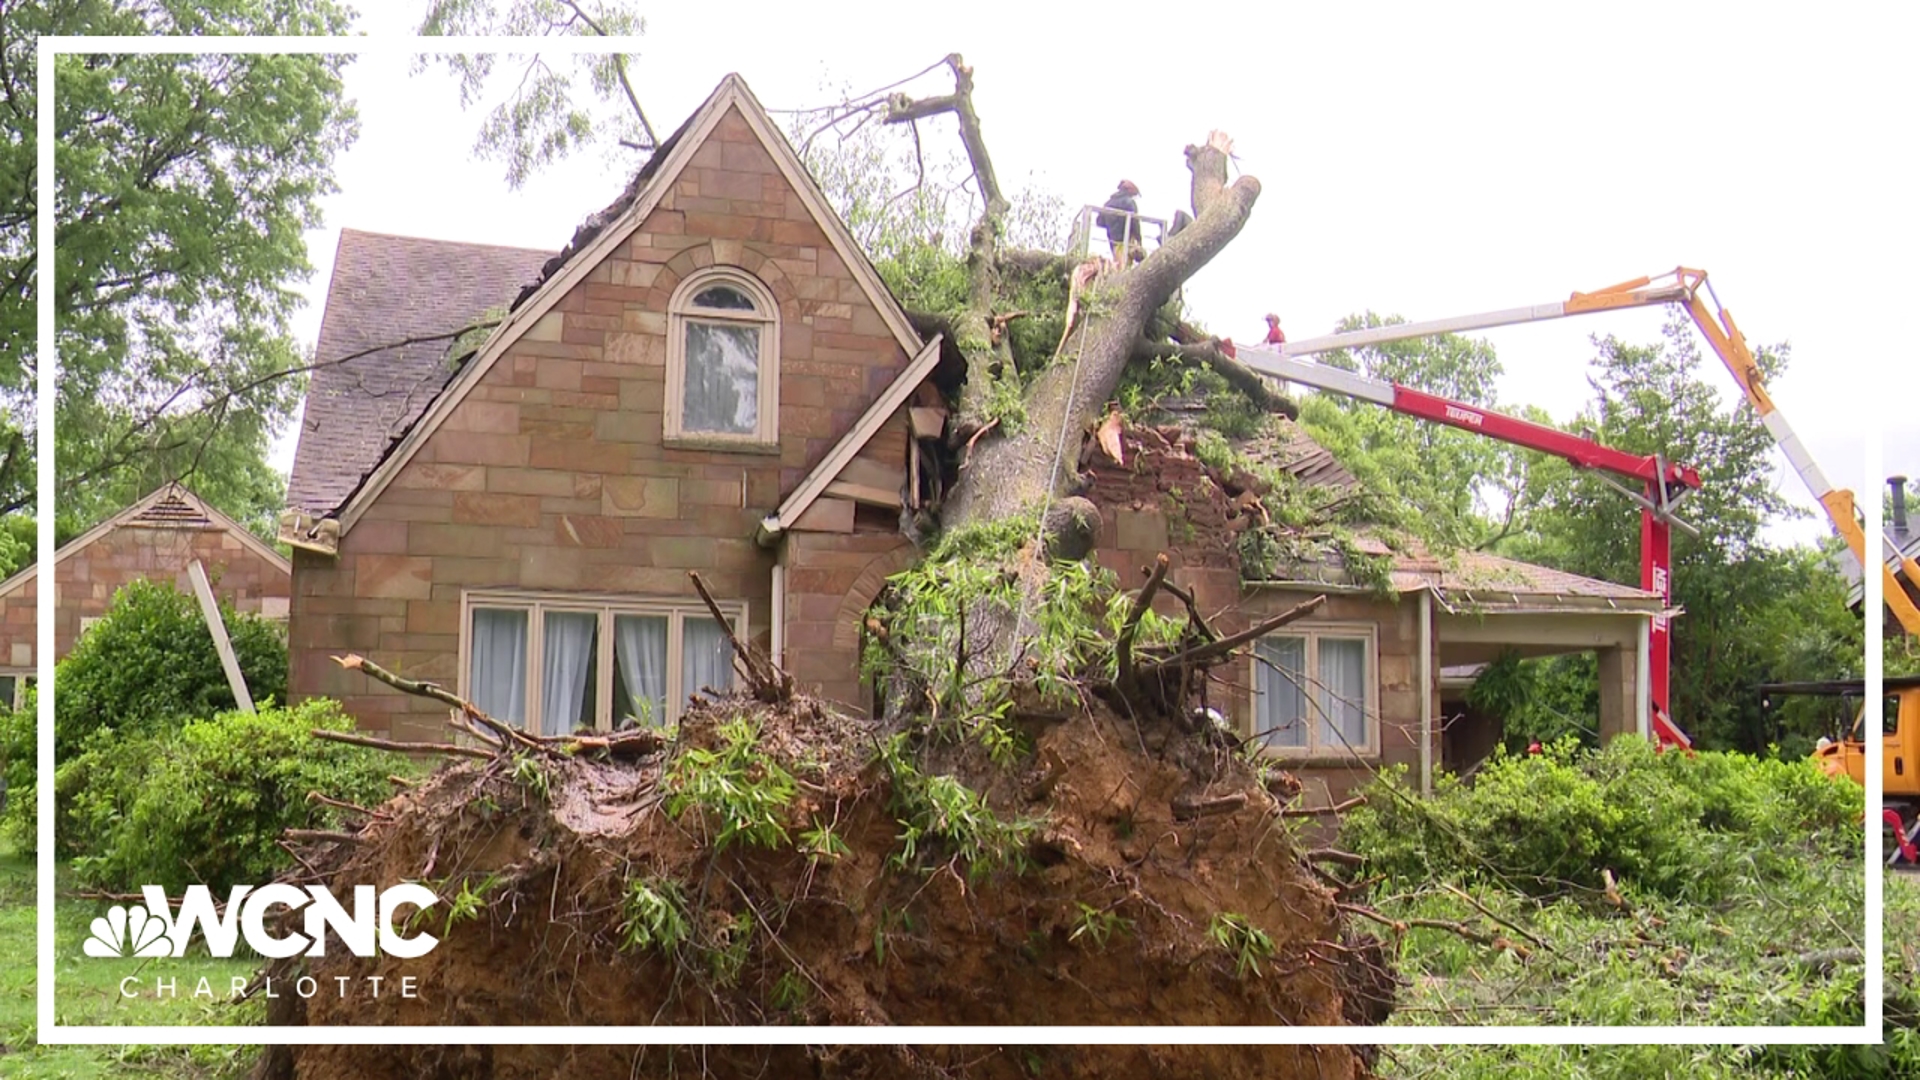 Jesse Pierre reviews the damage done as storms rolled through the area.